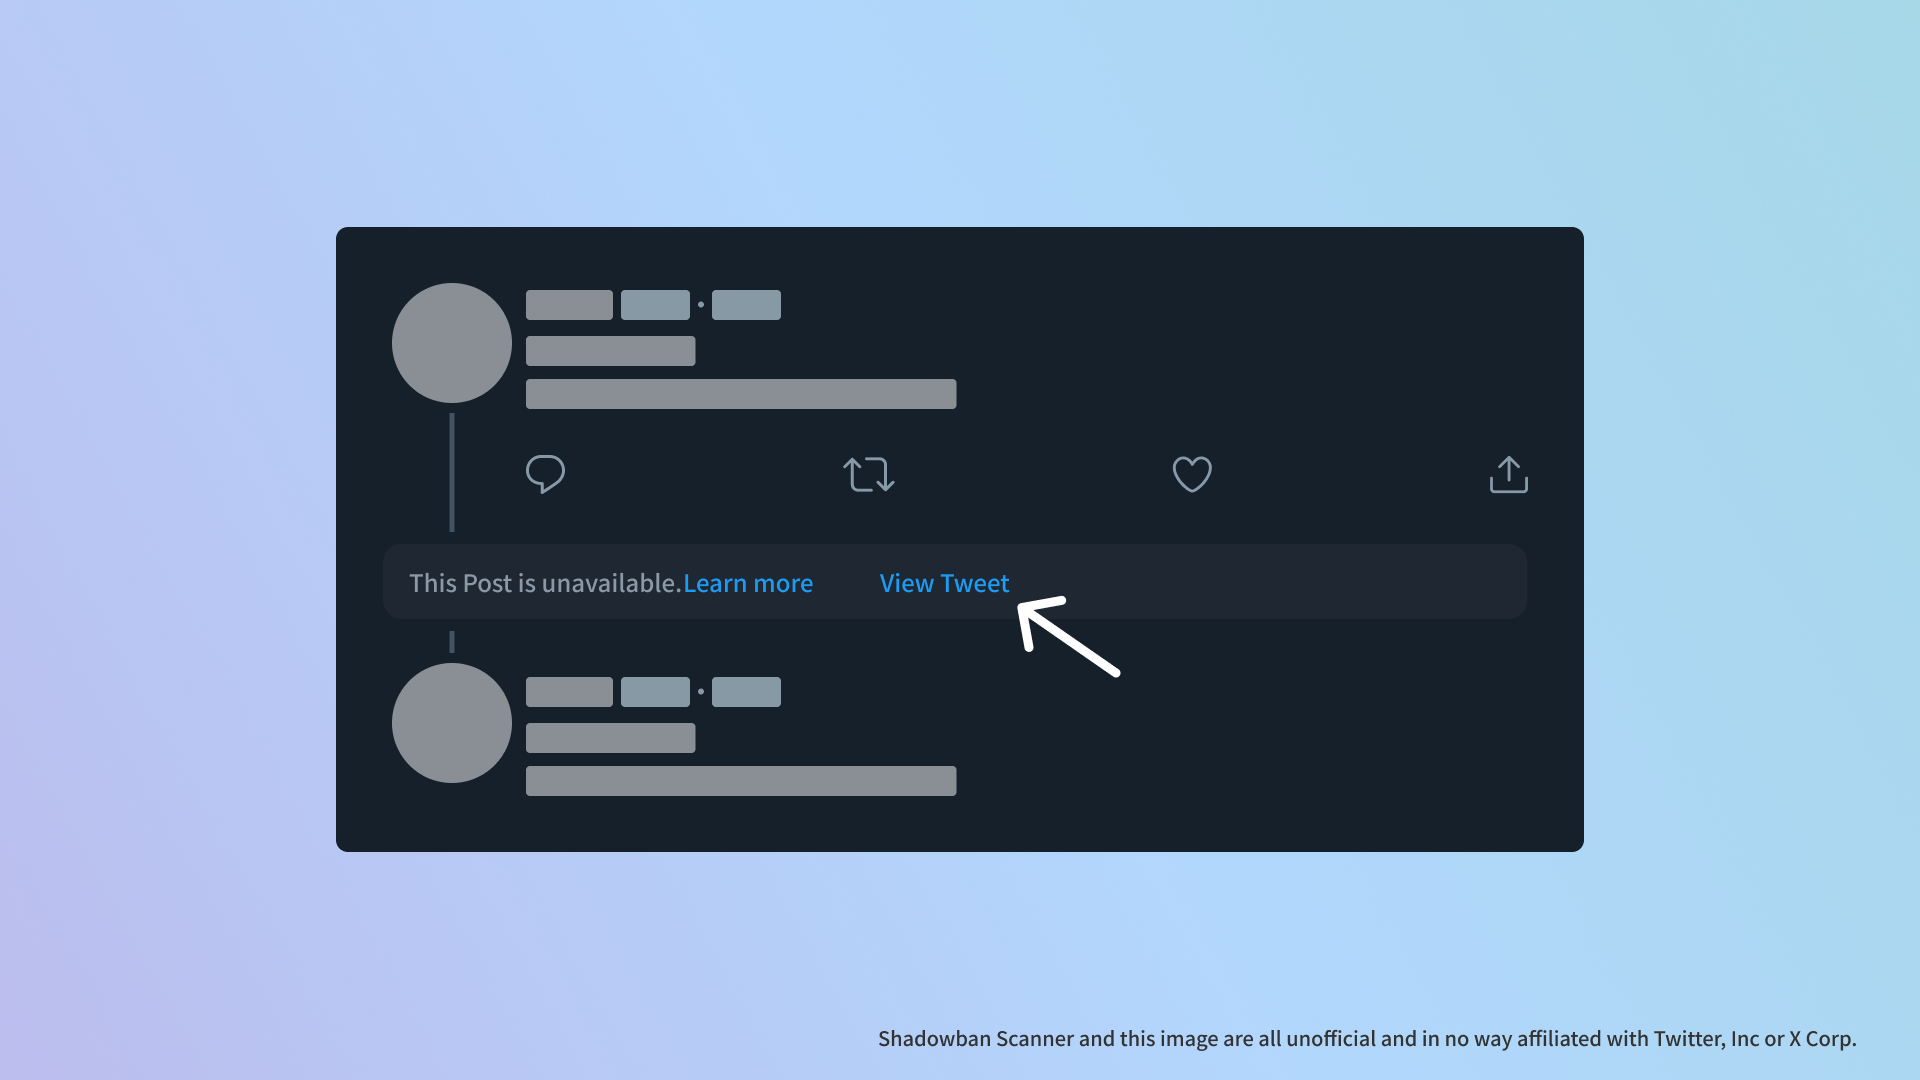 Shadowban Scanner for Twitter / X